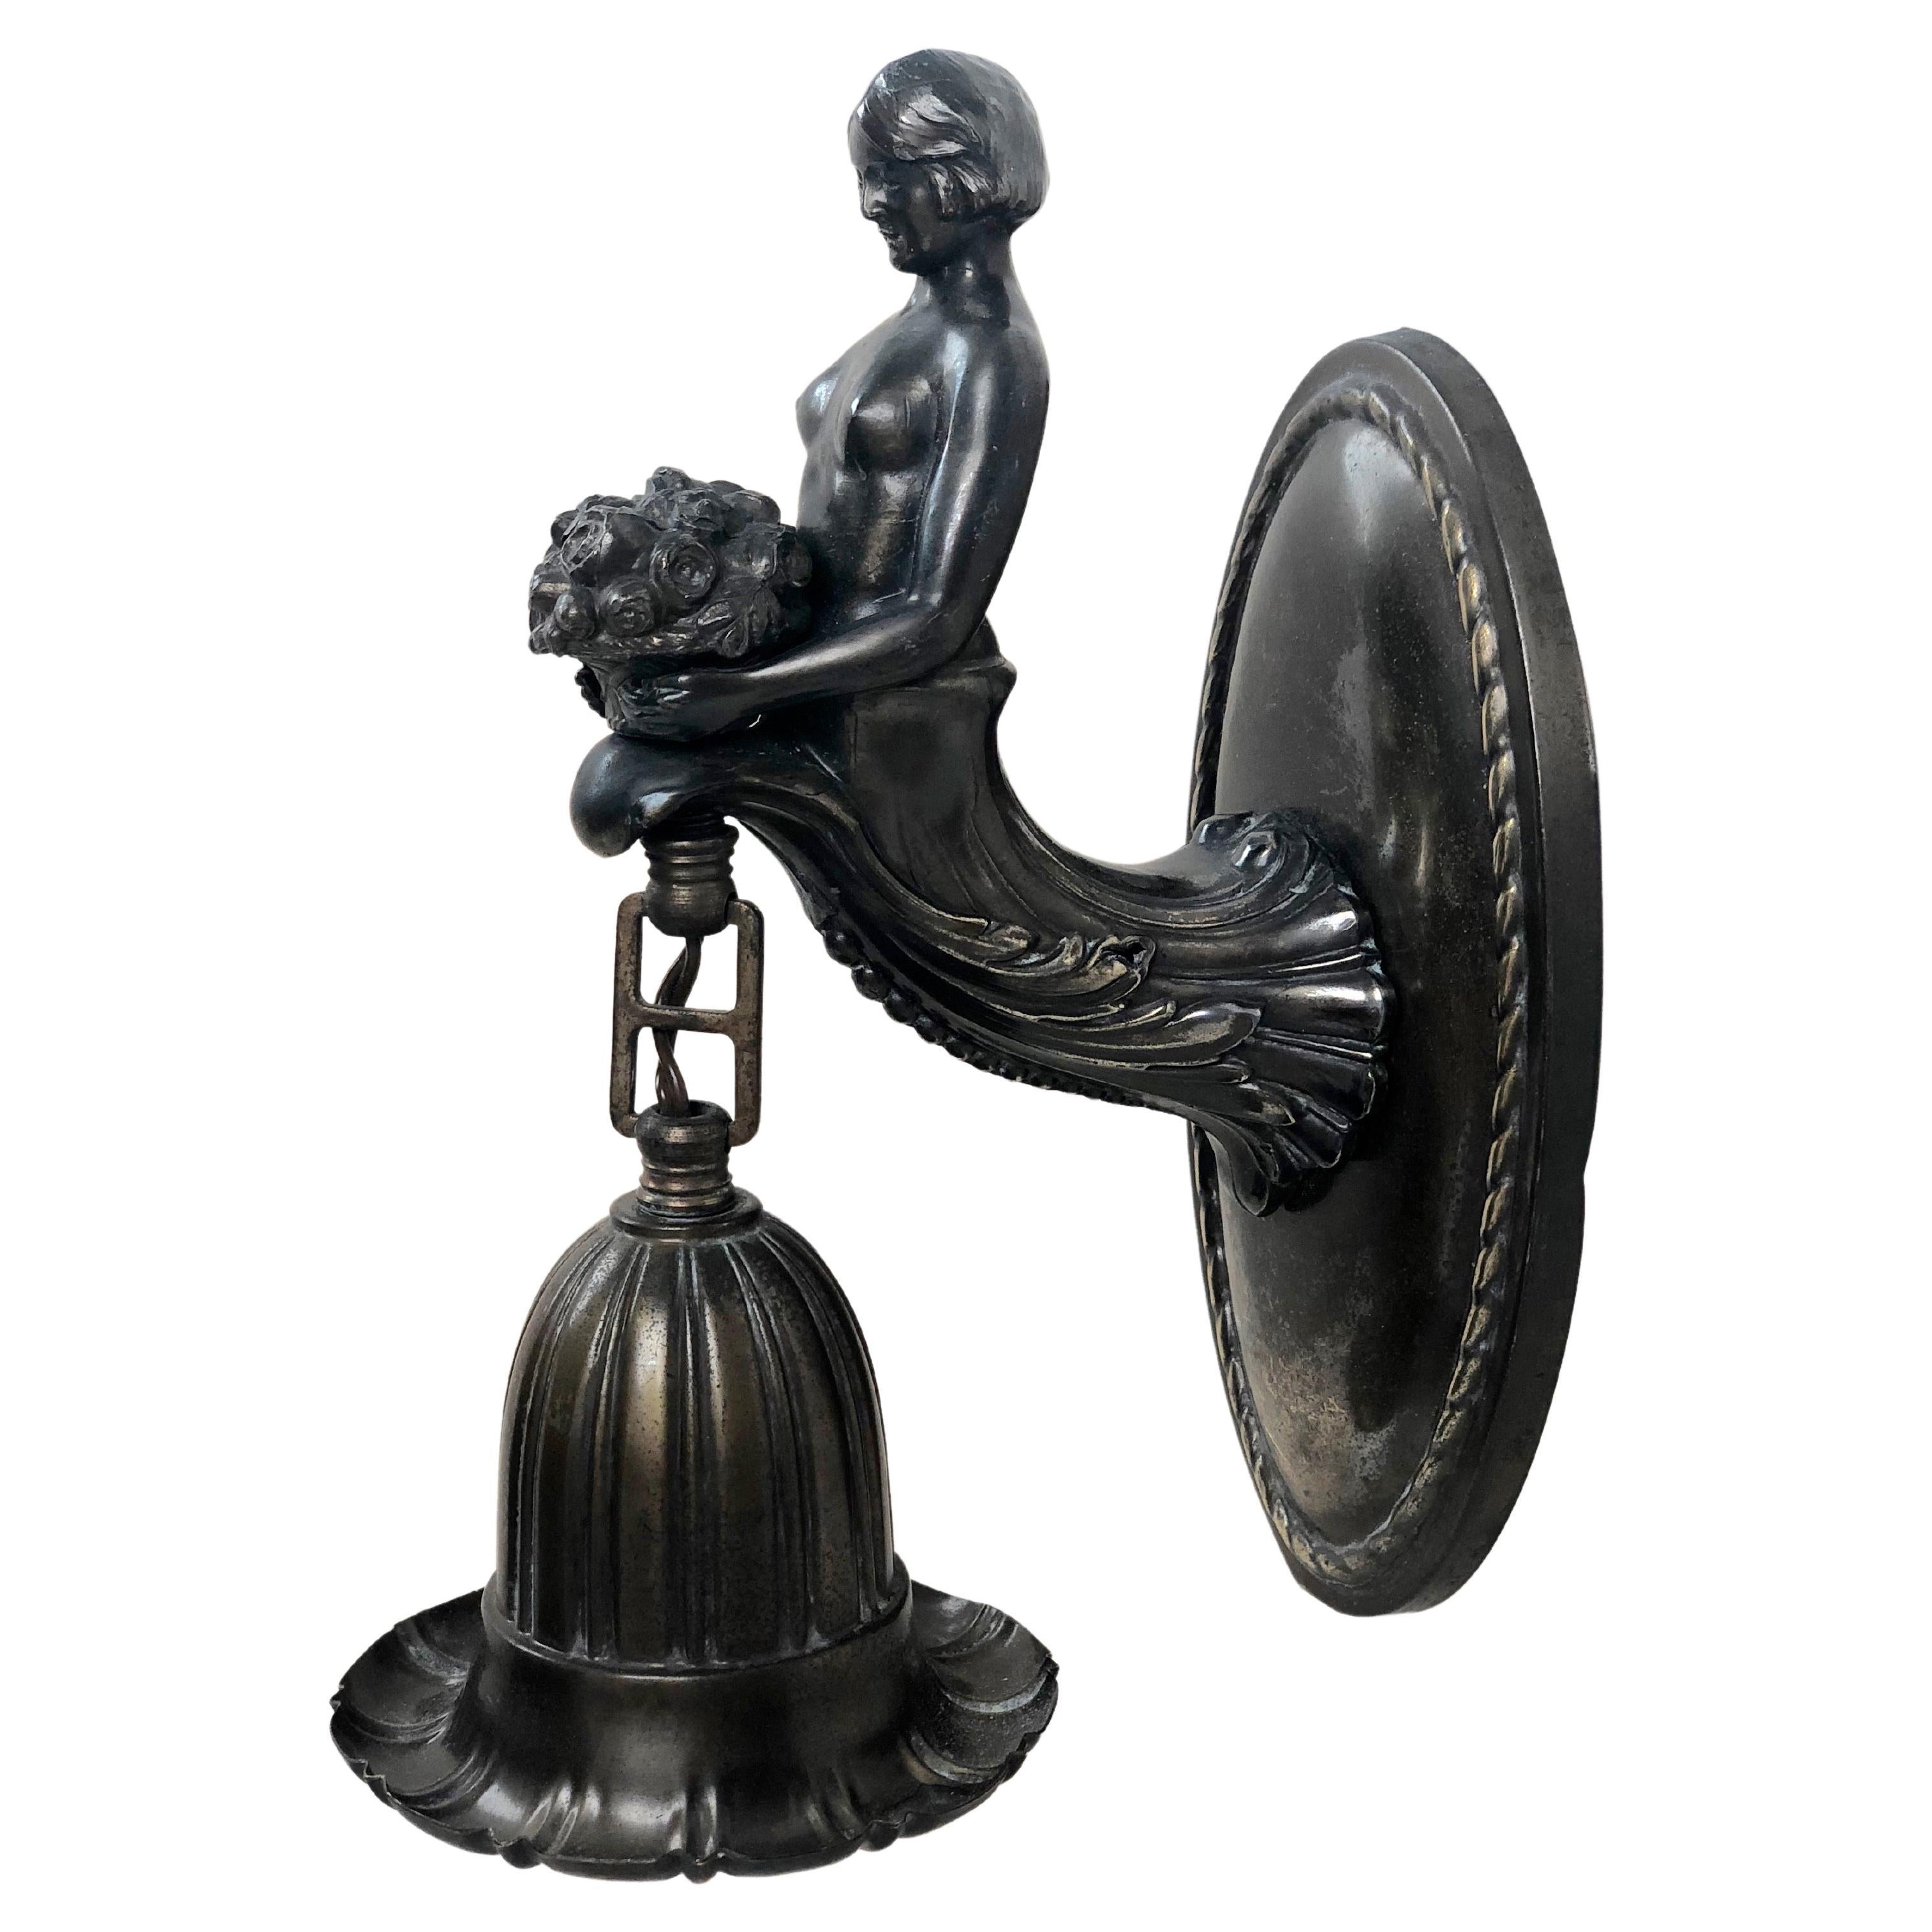 Austrian Jugendstil Bronze Wall Sconce with a Torso of a Women Holding a Bouquet For Sale